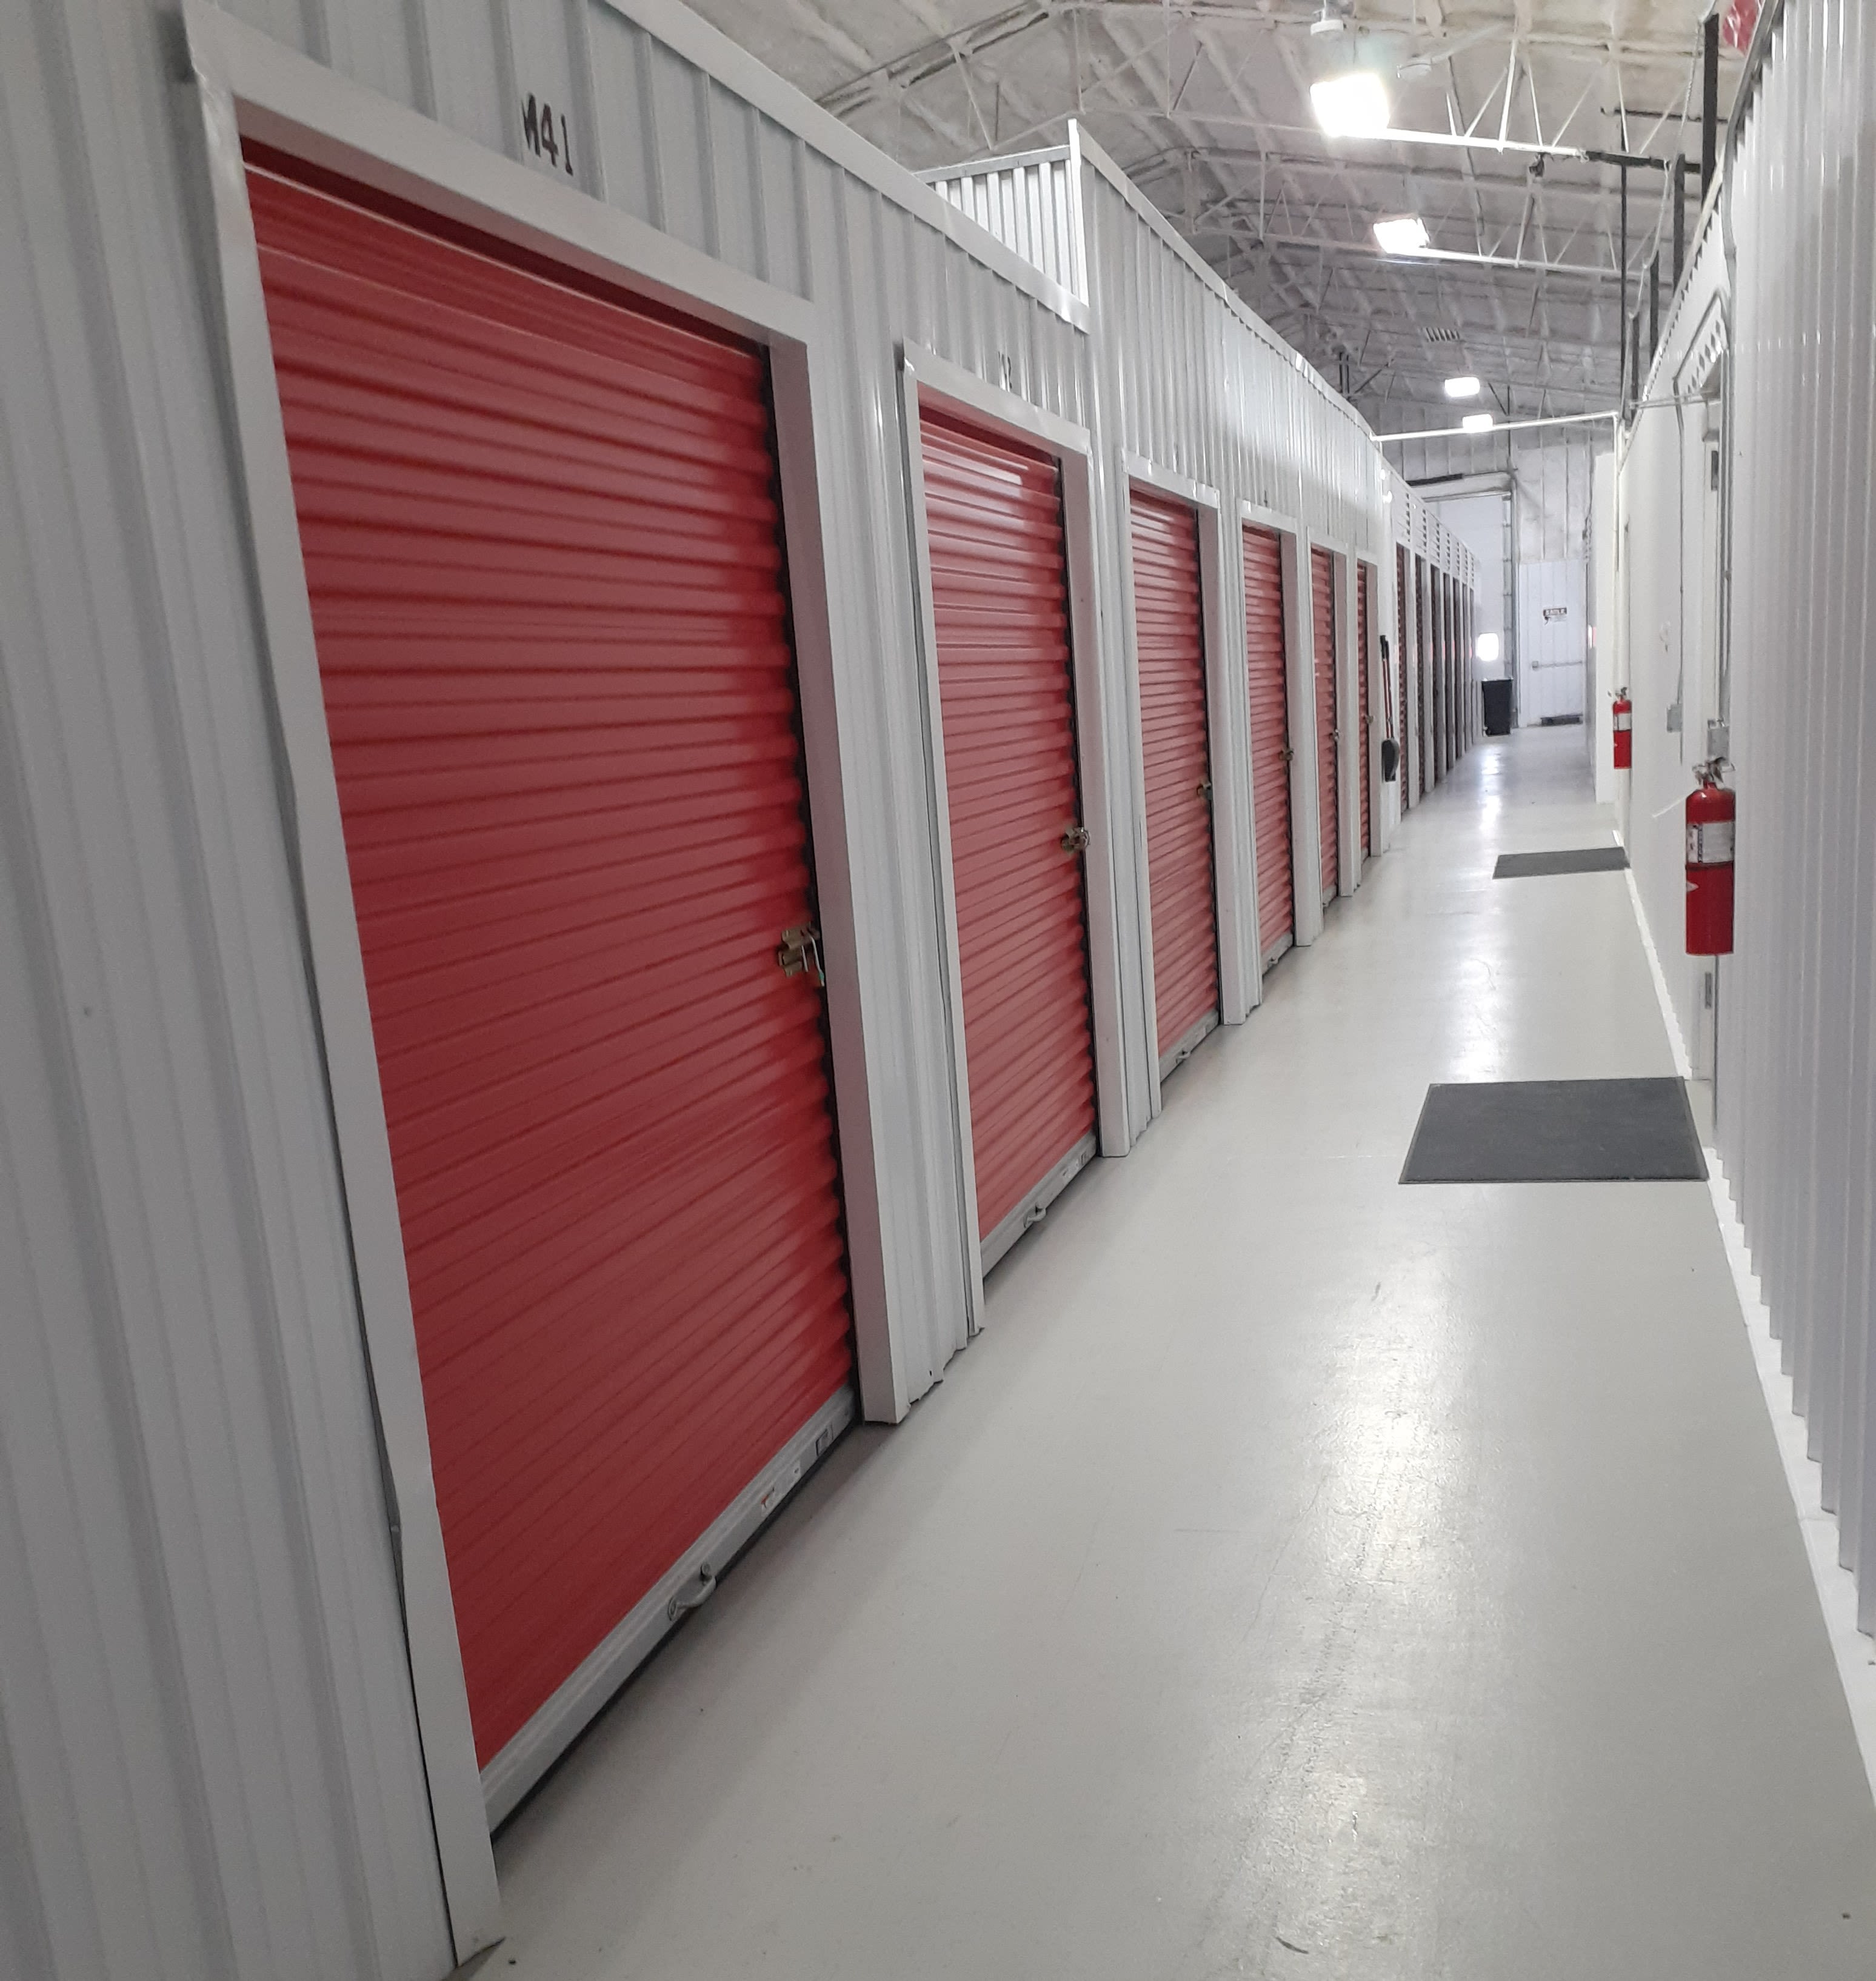 Learn more about features at KO Storage in Jamestown, North Dakota